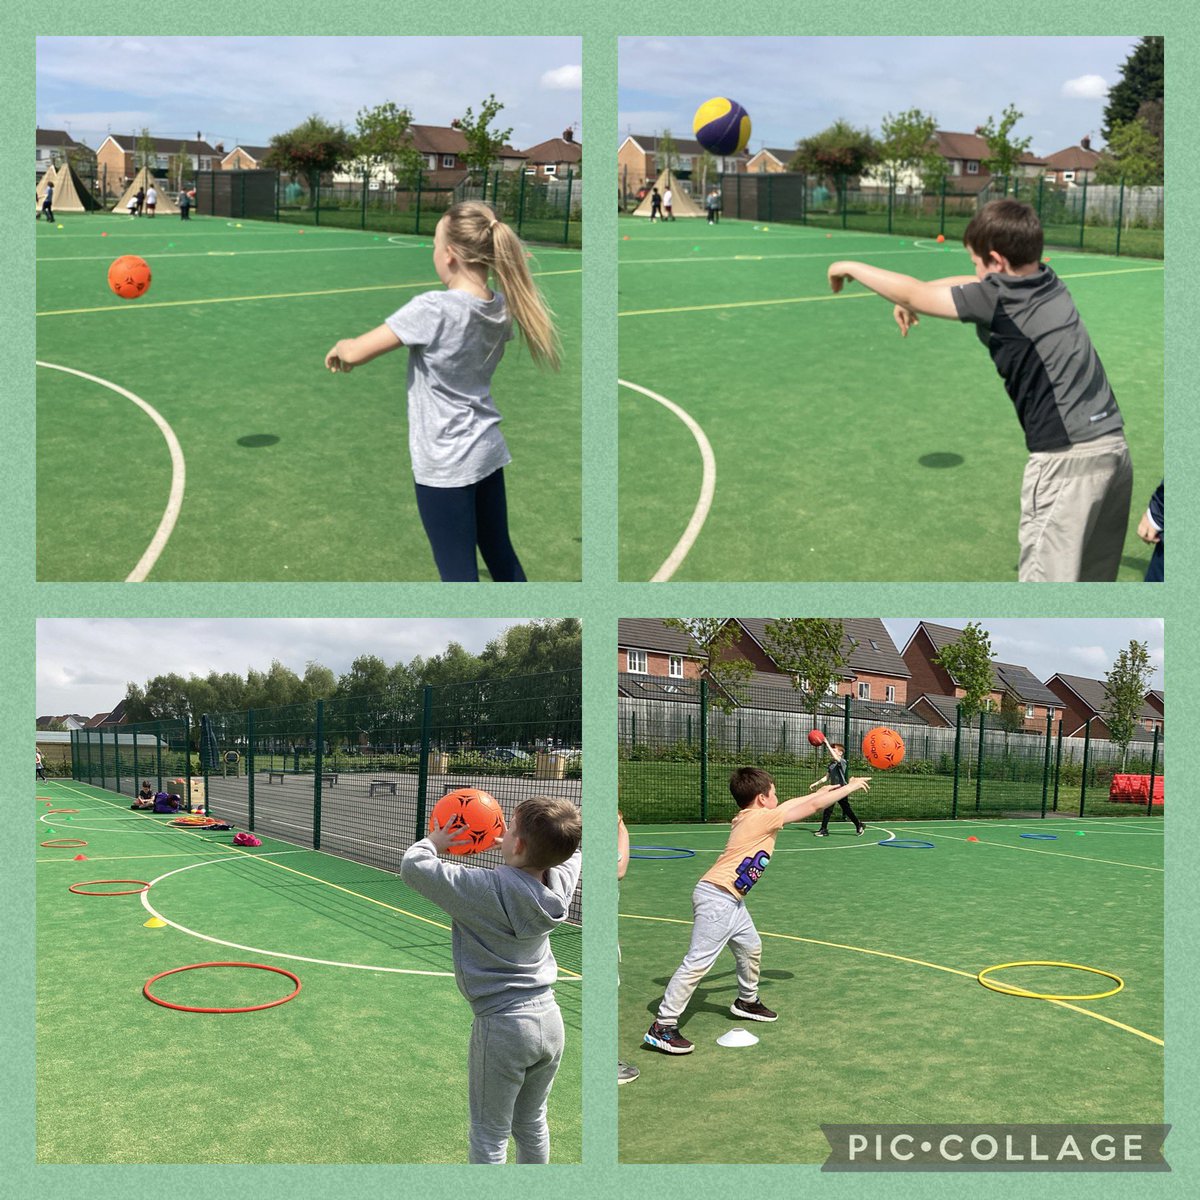 @Year3RobyPark Today in PE our aim was to develop throwing for distance and accuracy. Well done year 3!